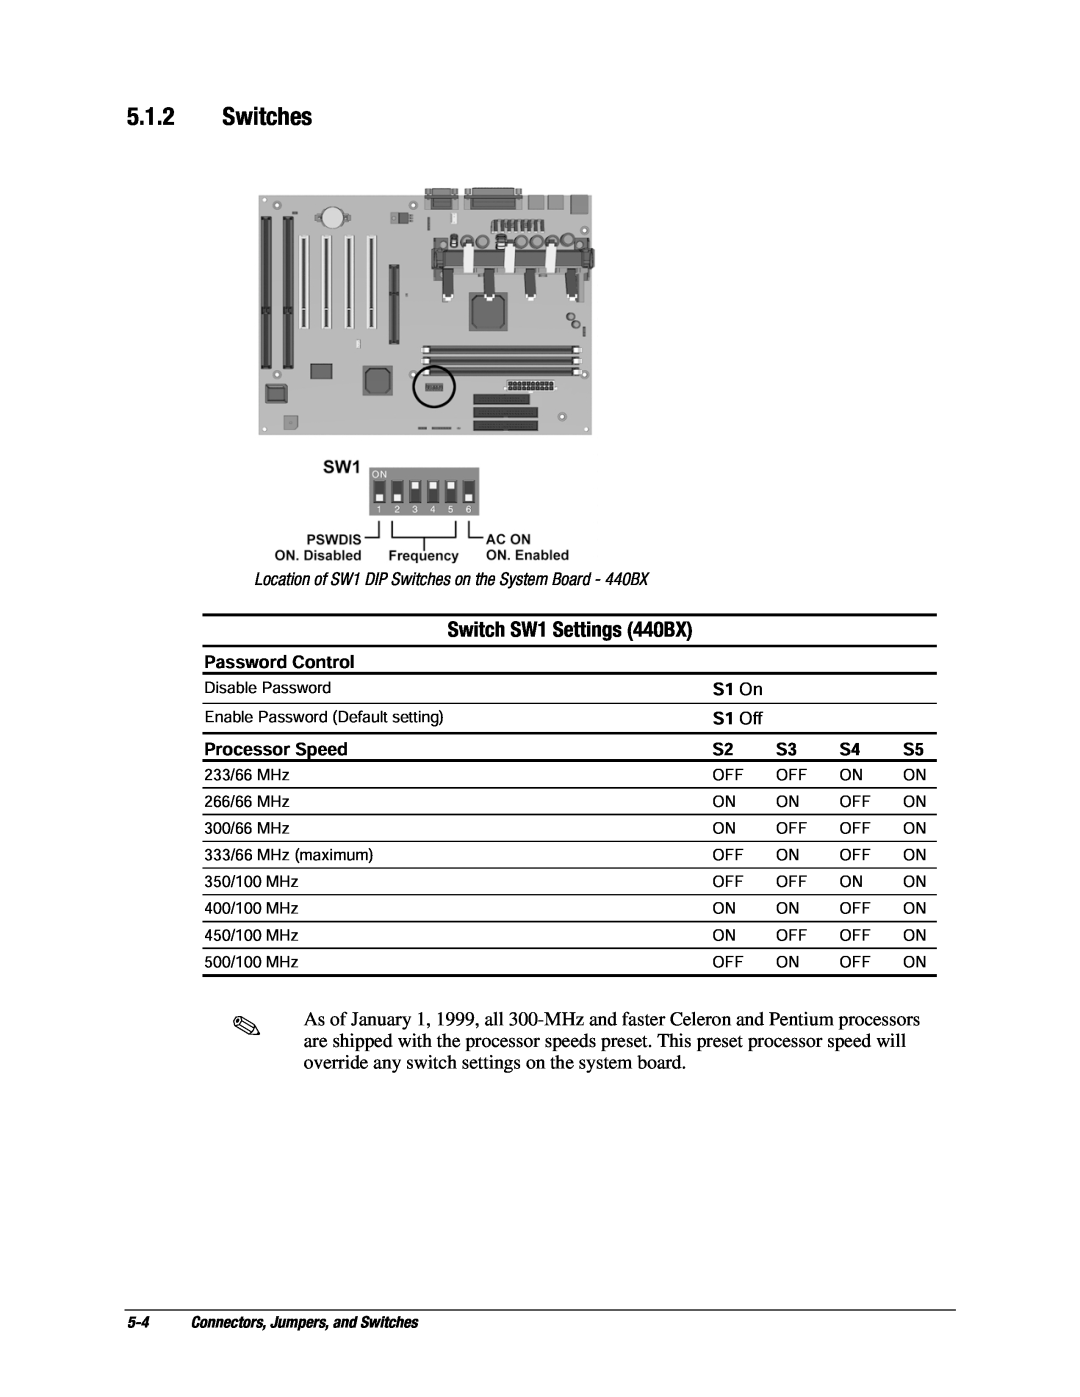 Compaq EP Series manual Switches, Switch SW1 Settings 440BX 